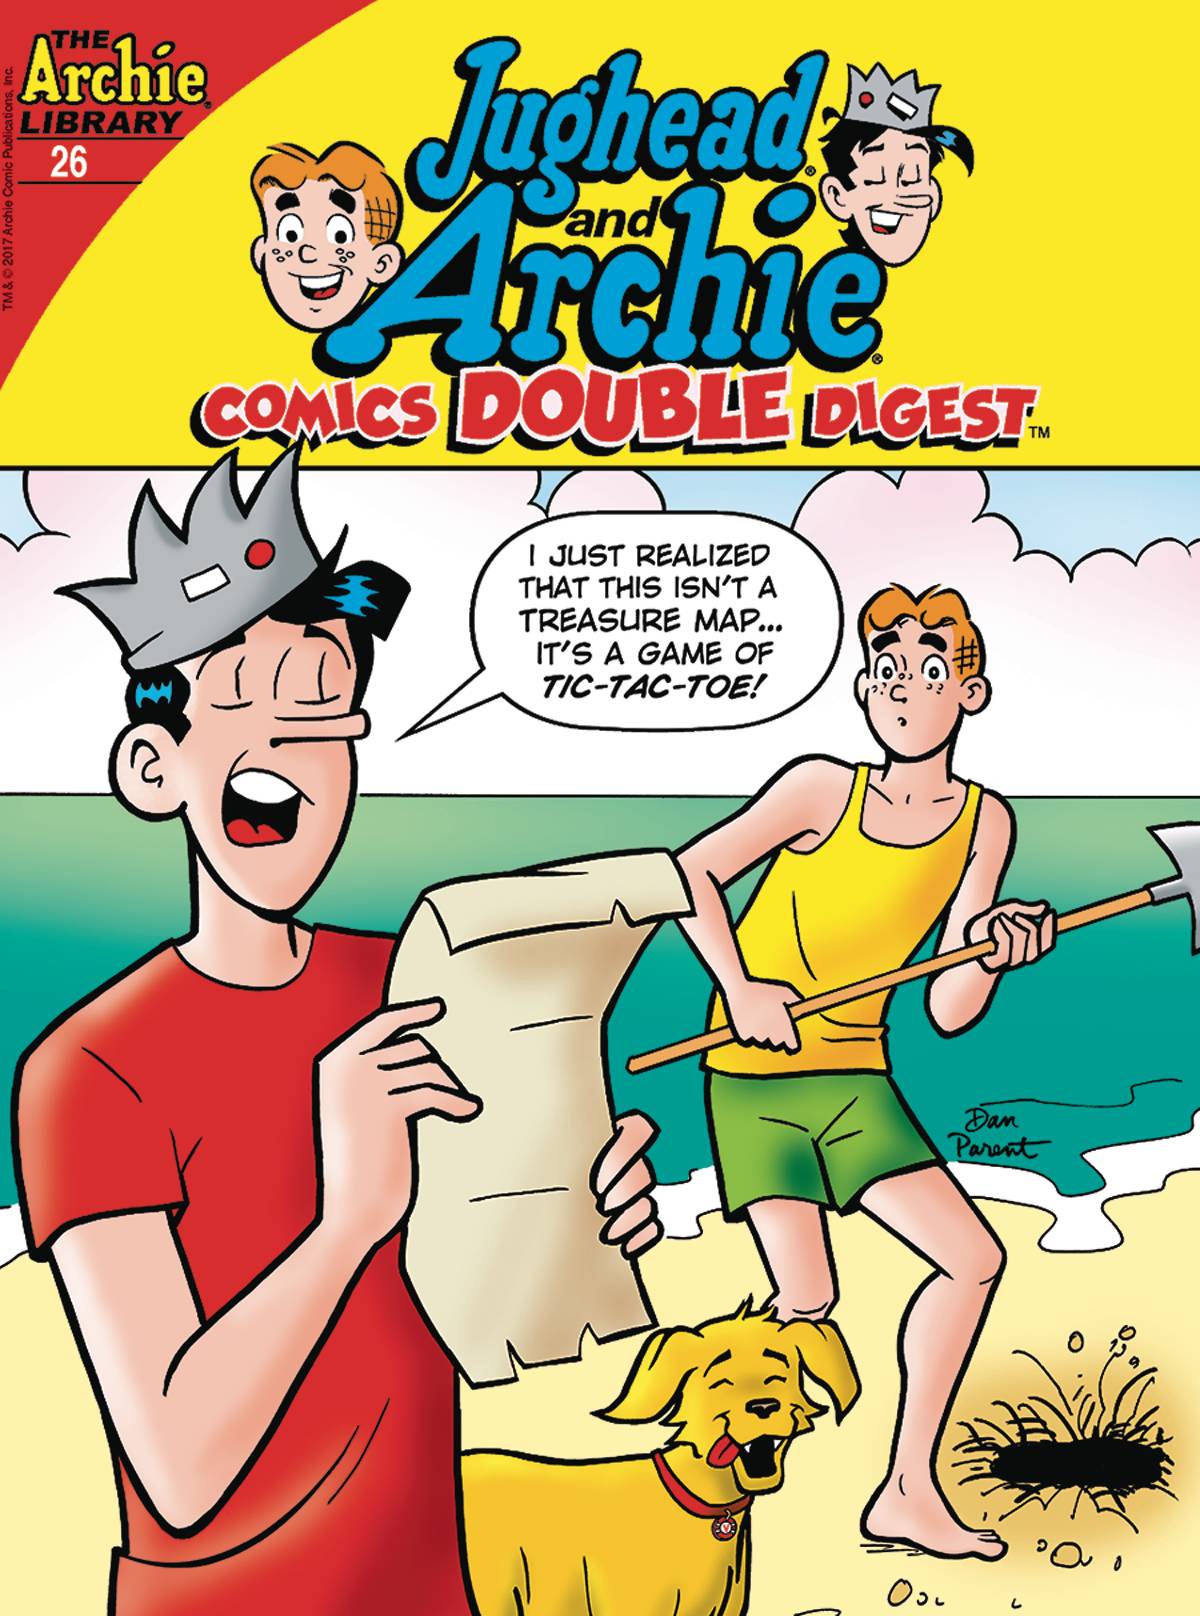 JUGHEAD AND ARCHIE DOUBLE DIGEST#26